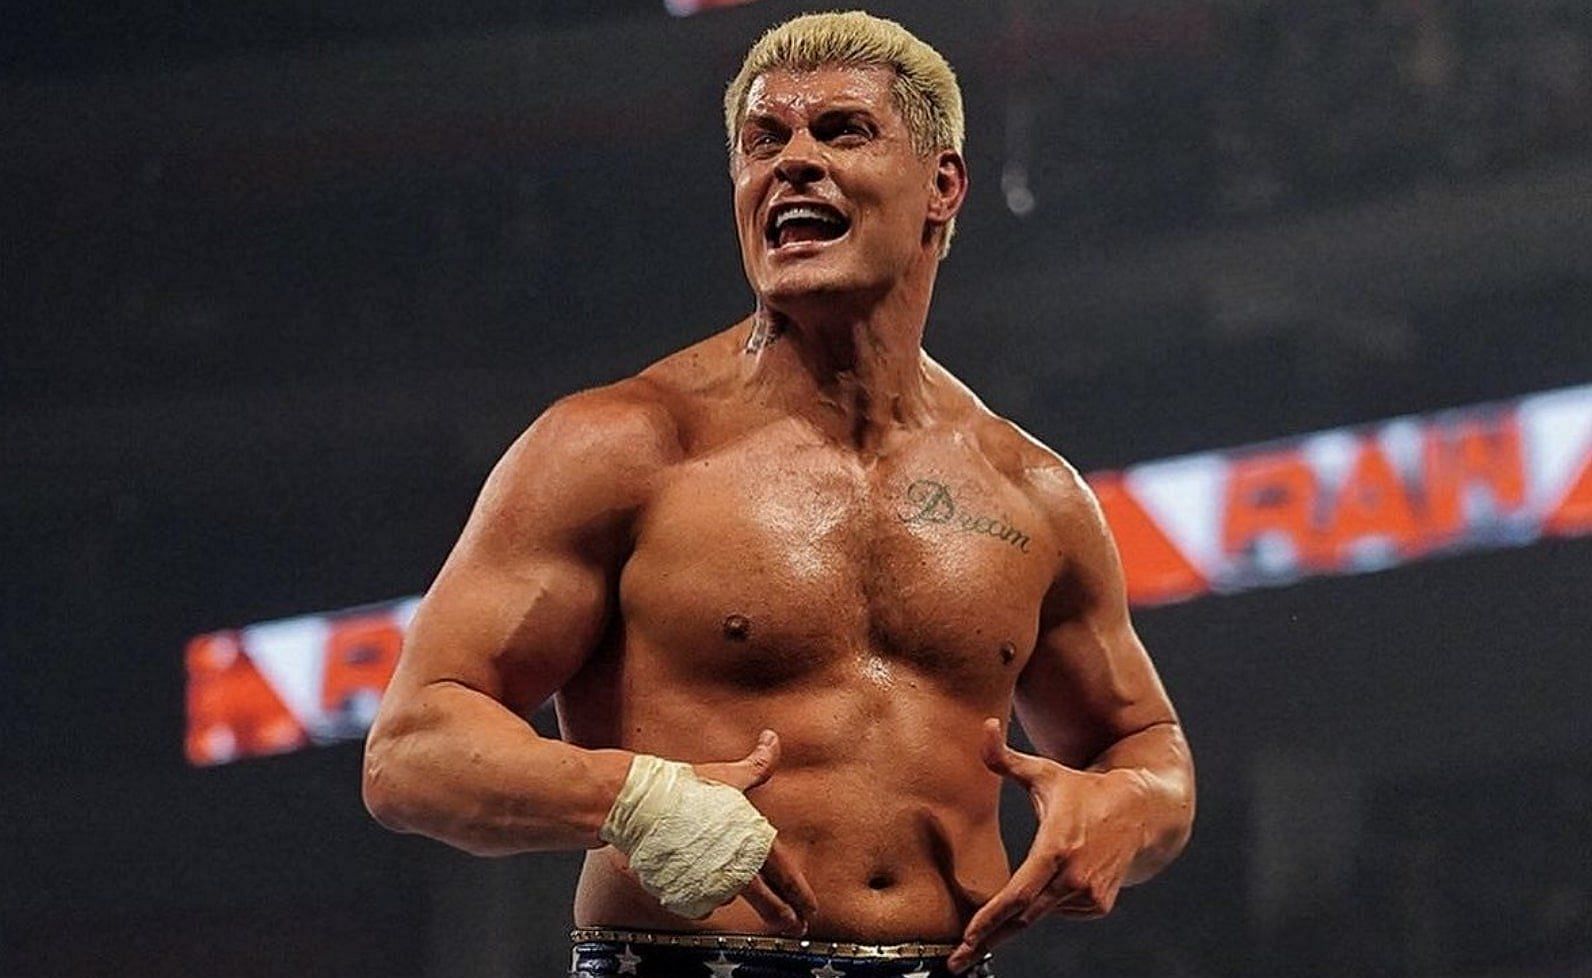 Cody Rhodes deserves to win the world title